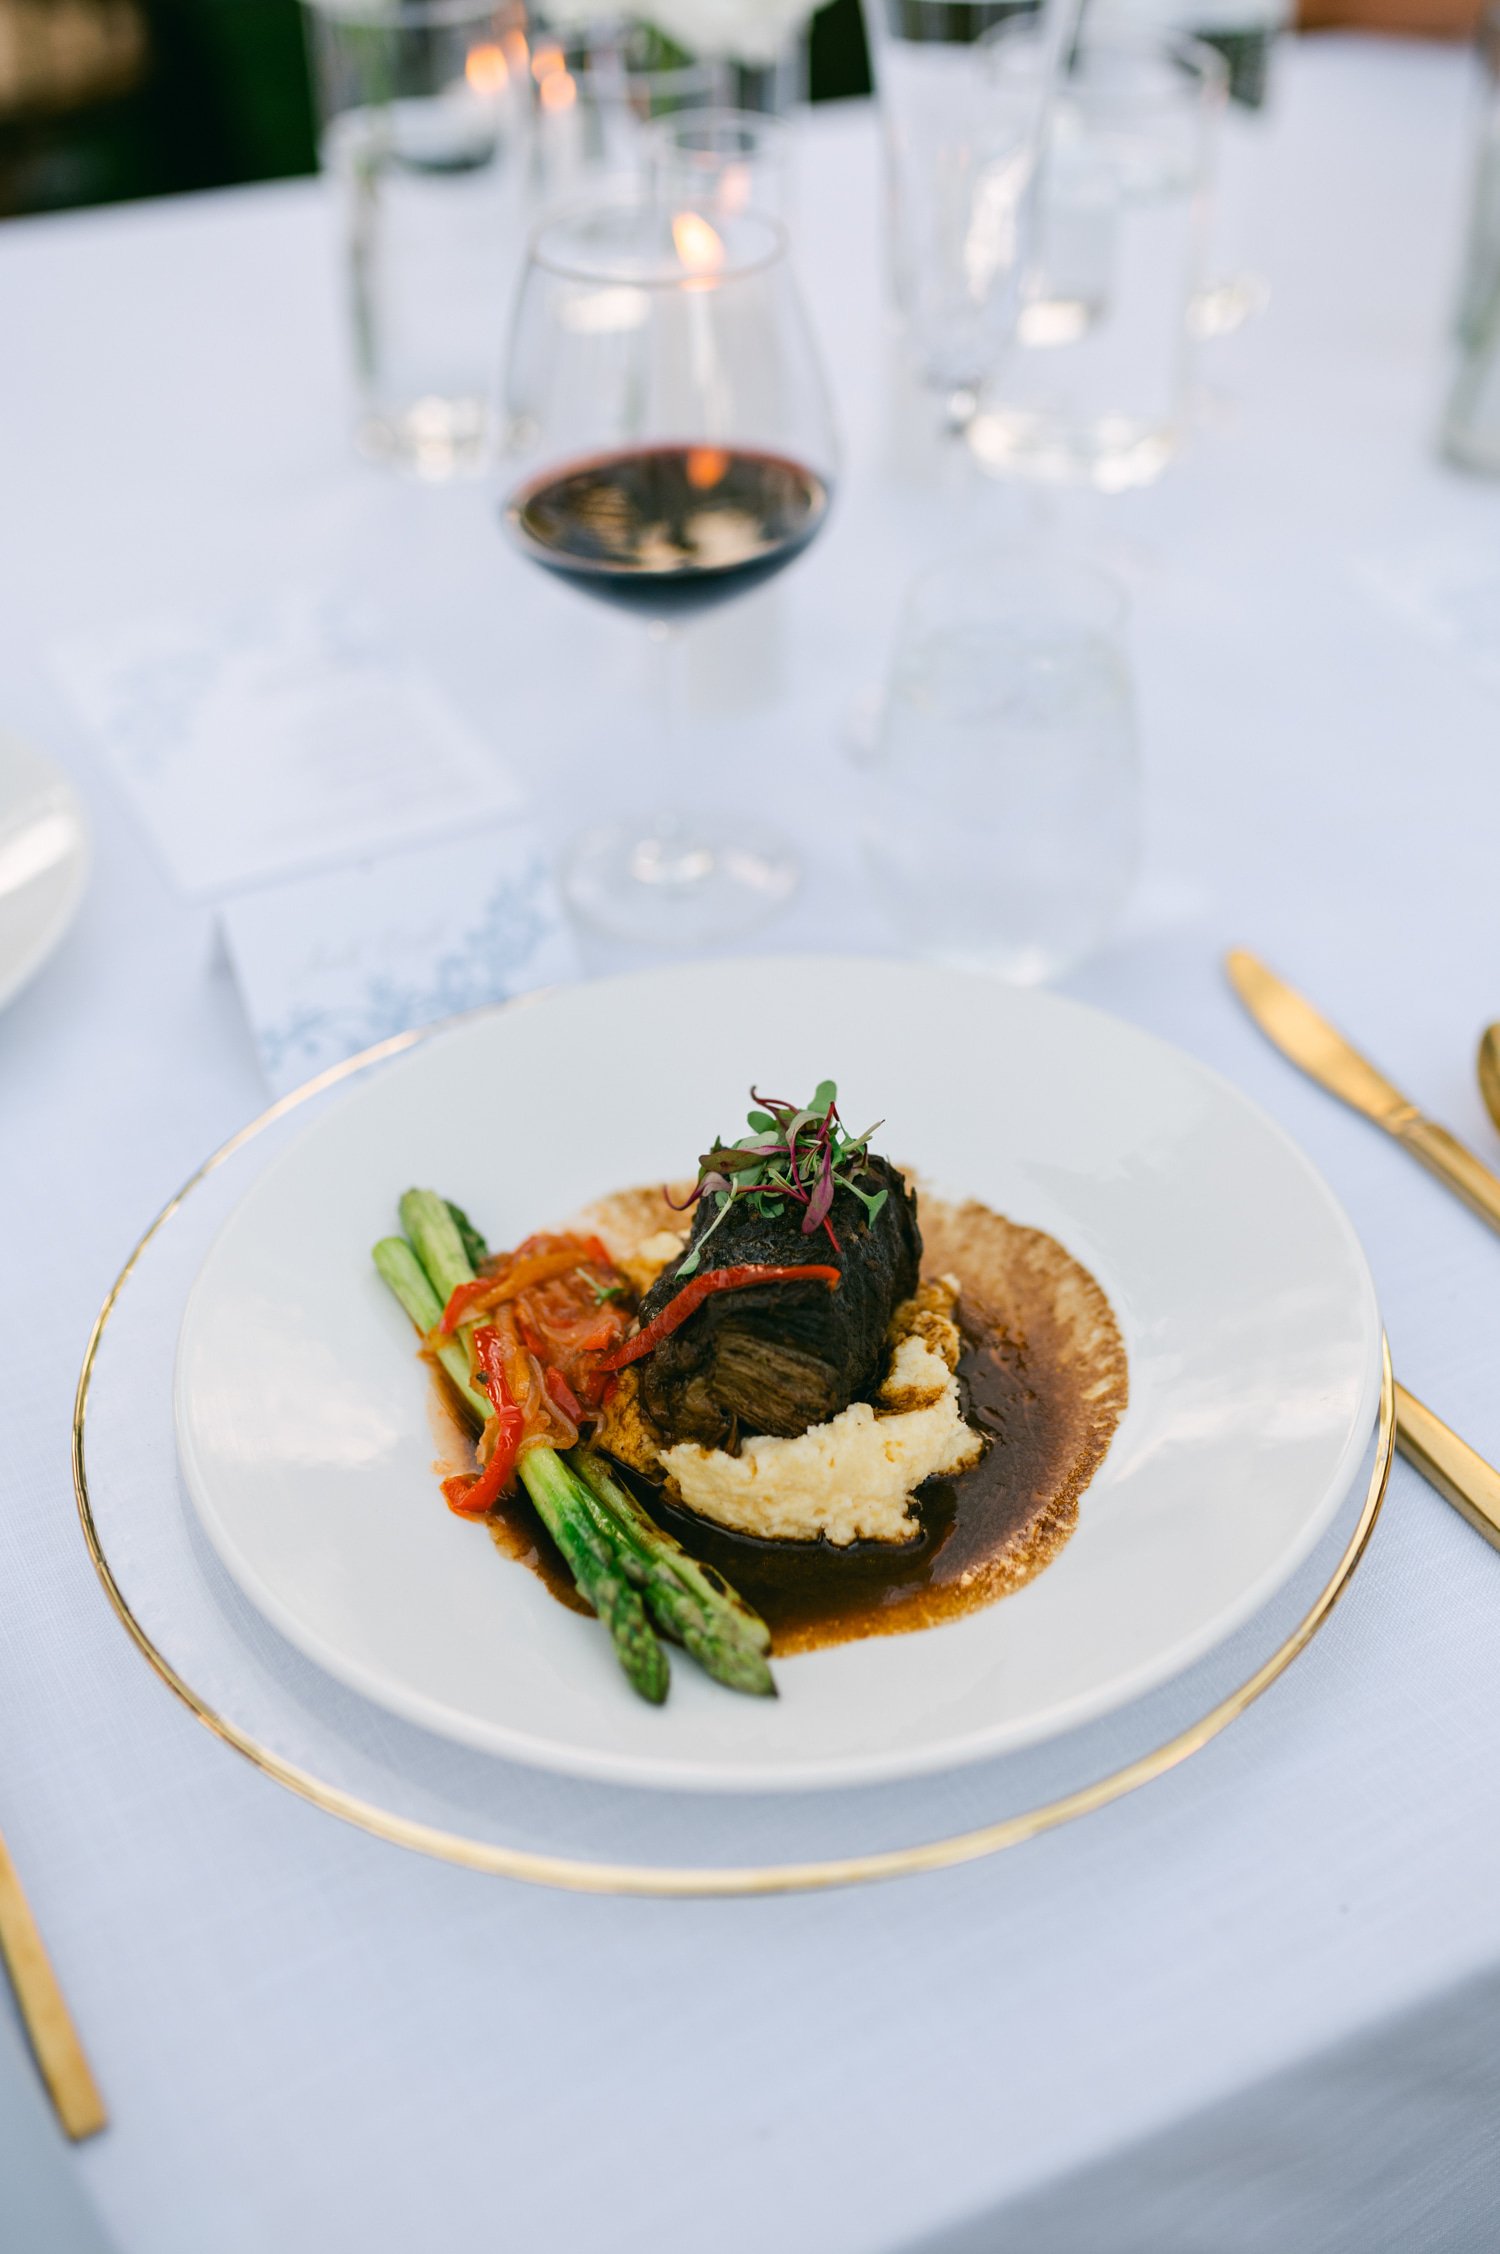 Martis Camp Wedding, photo of the food served during the evening reception